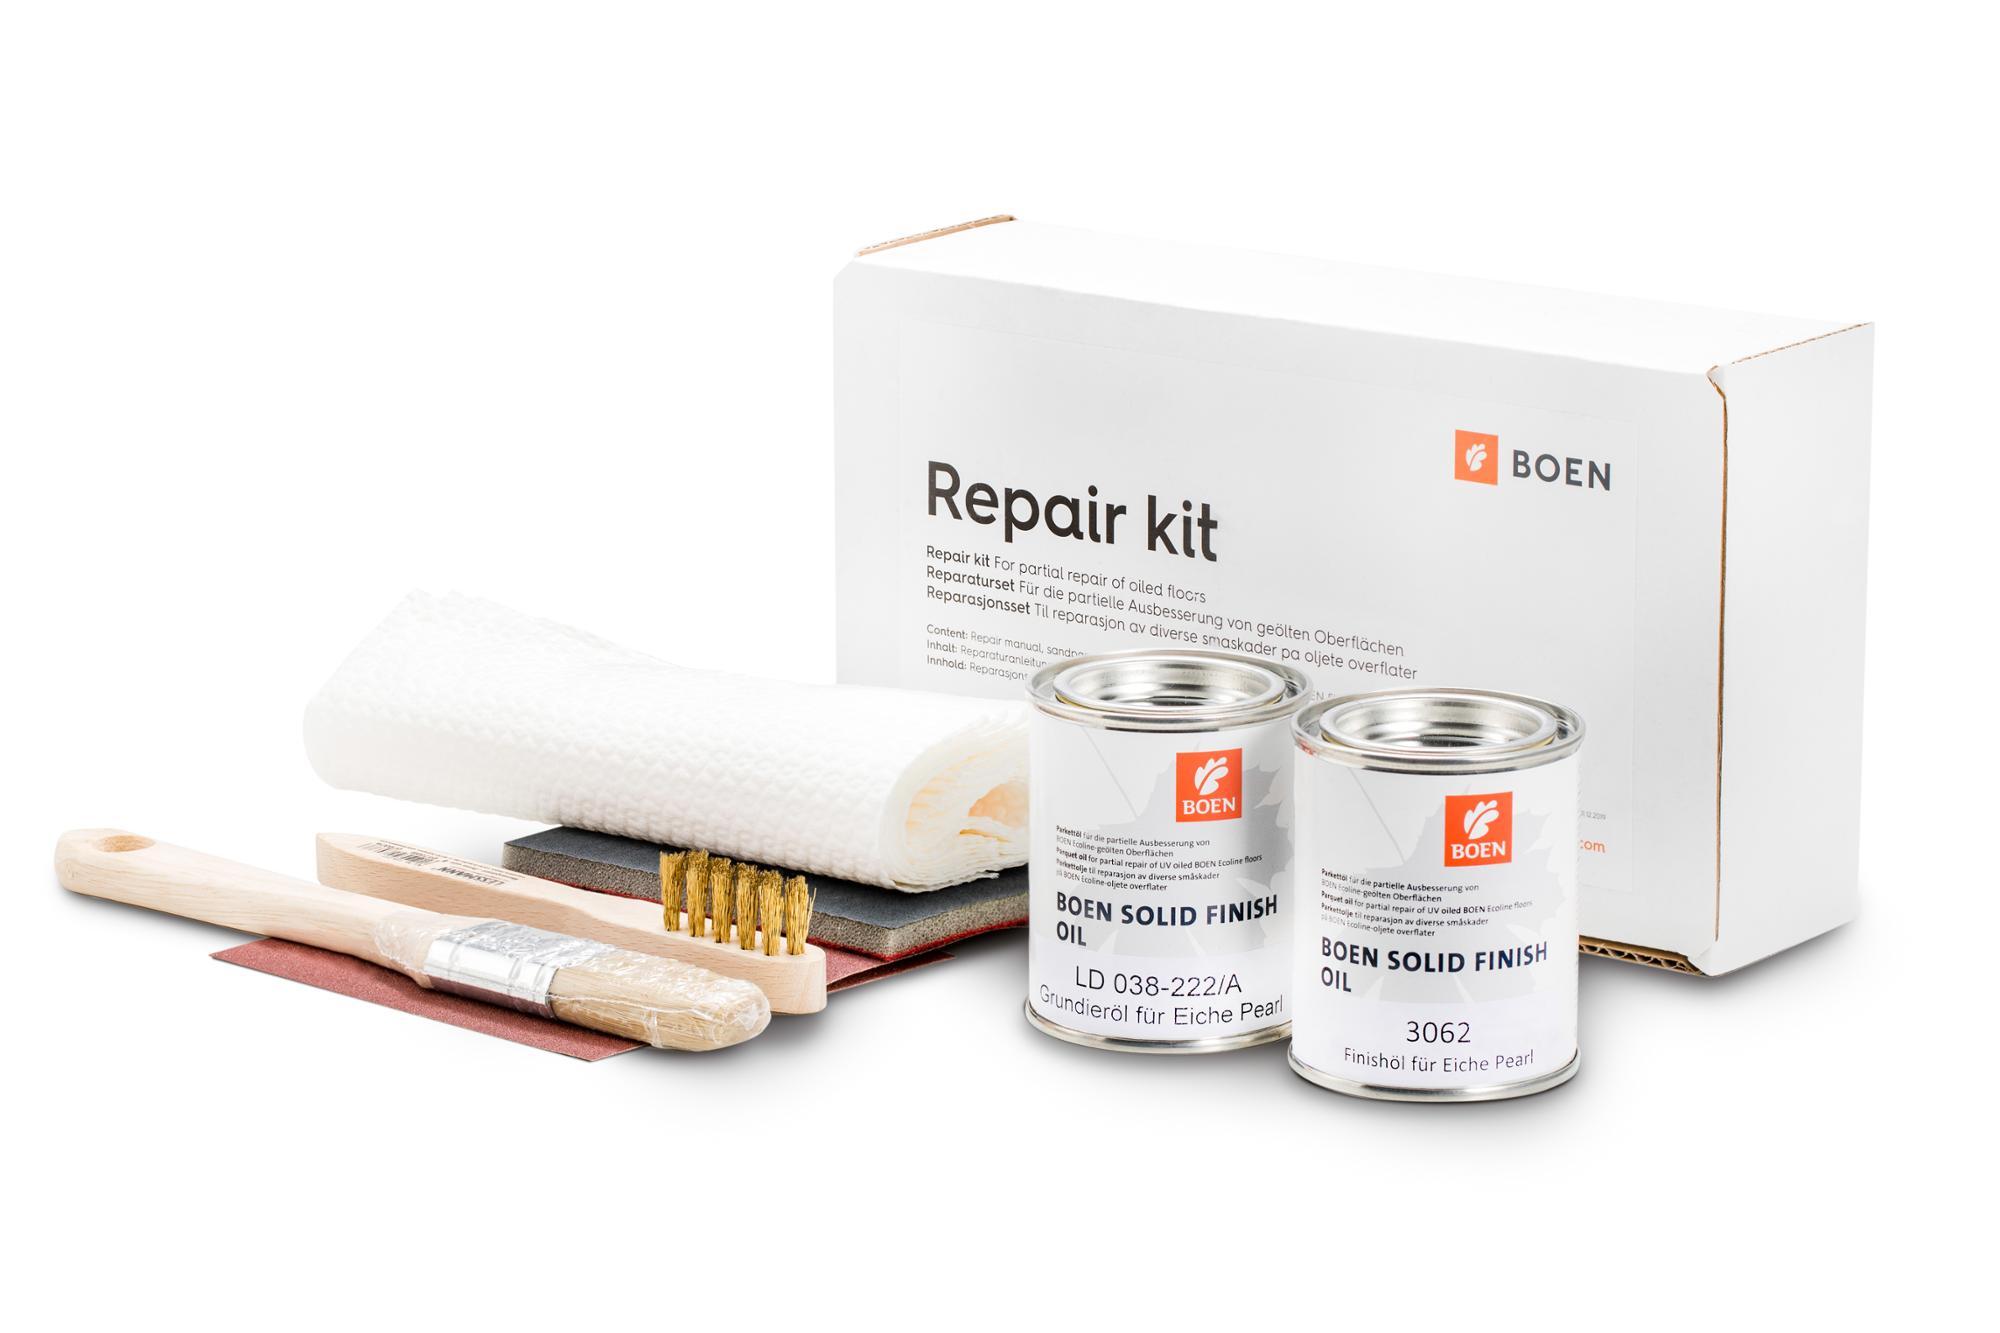 BOEN kit riparazione per Rovere Pearl

For the partial repair of natural oiled surfaces.
Content: Repair instruction, abrasive paper P 150,
abrasive web P 360, 0,125 l BOEN Live Natural Oil,
paint brush, cleaning cloths.